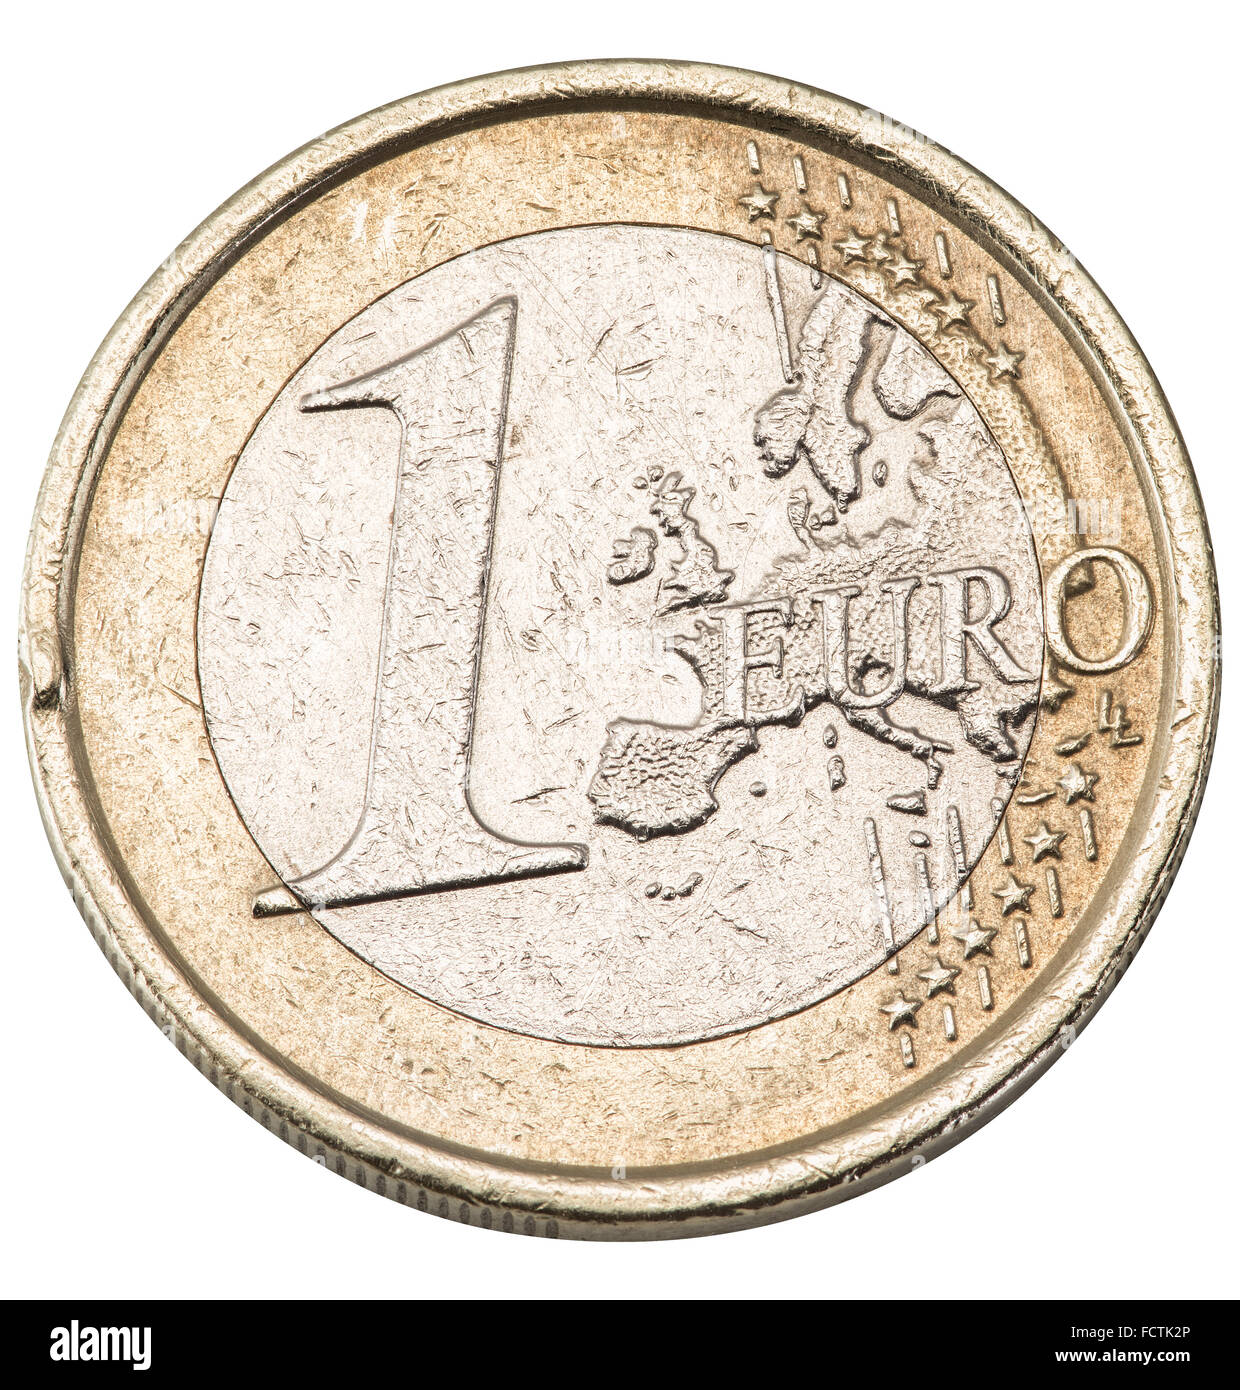 Old one euro coin isolated on a white background. File contains clipping paths. Stock Photo